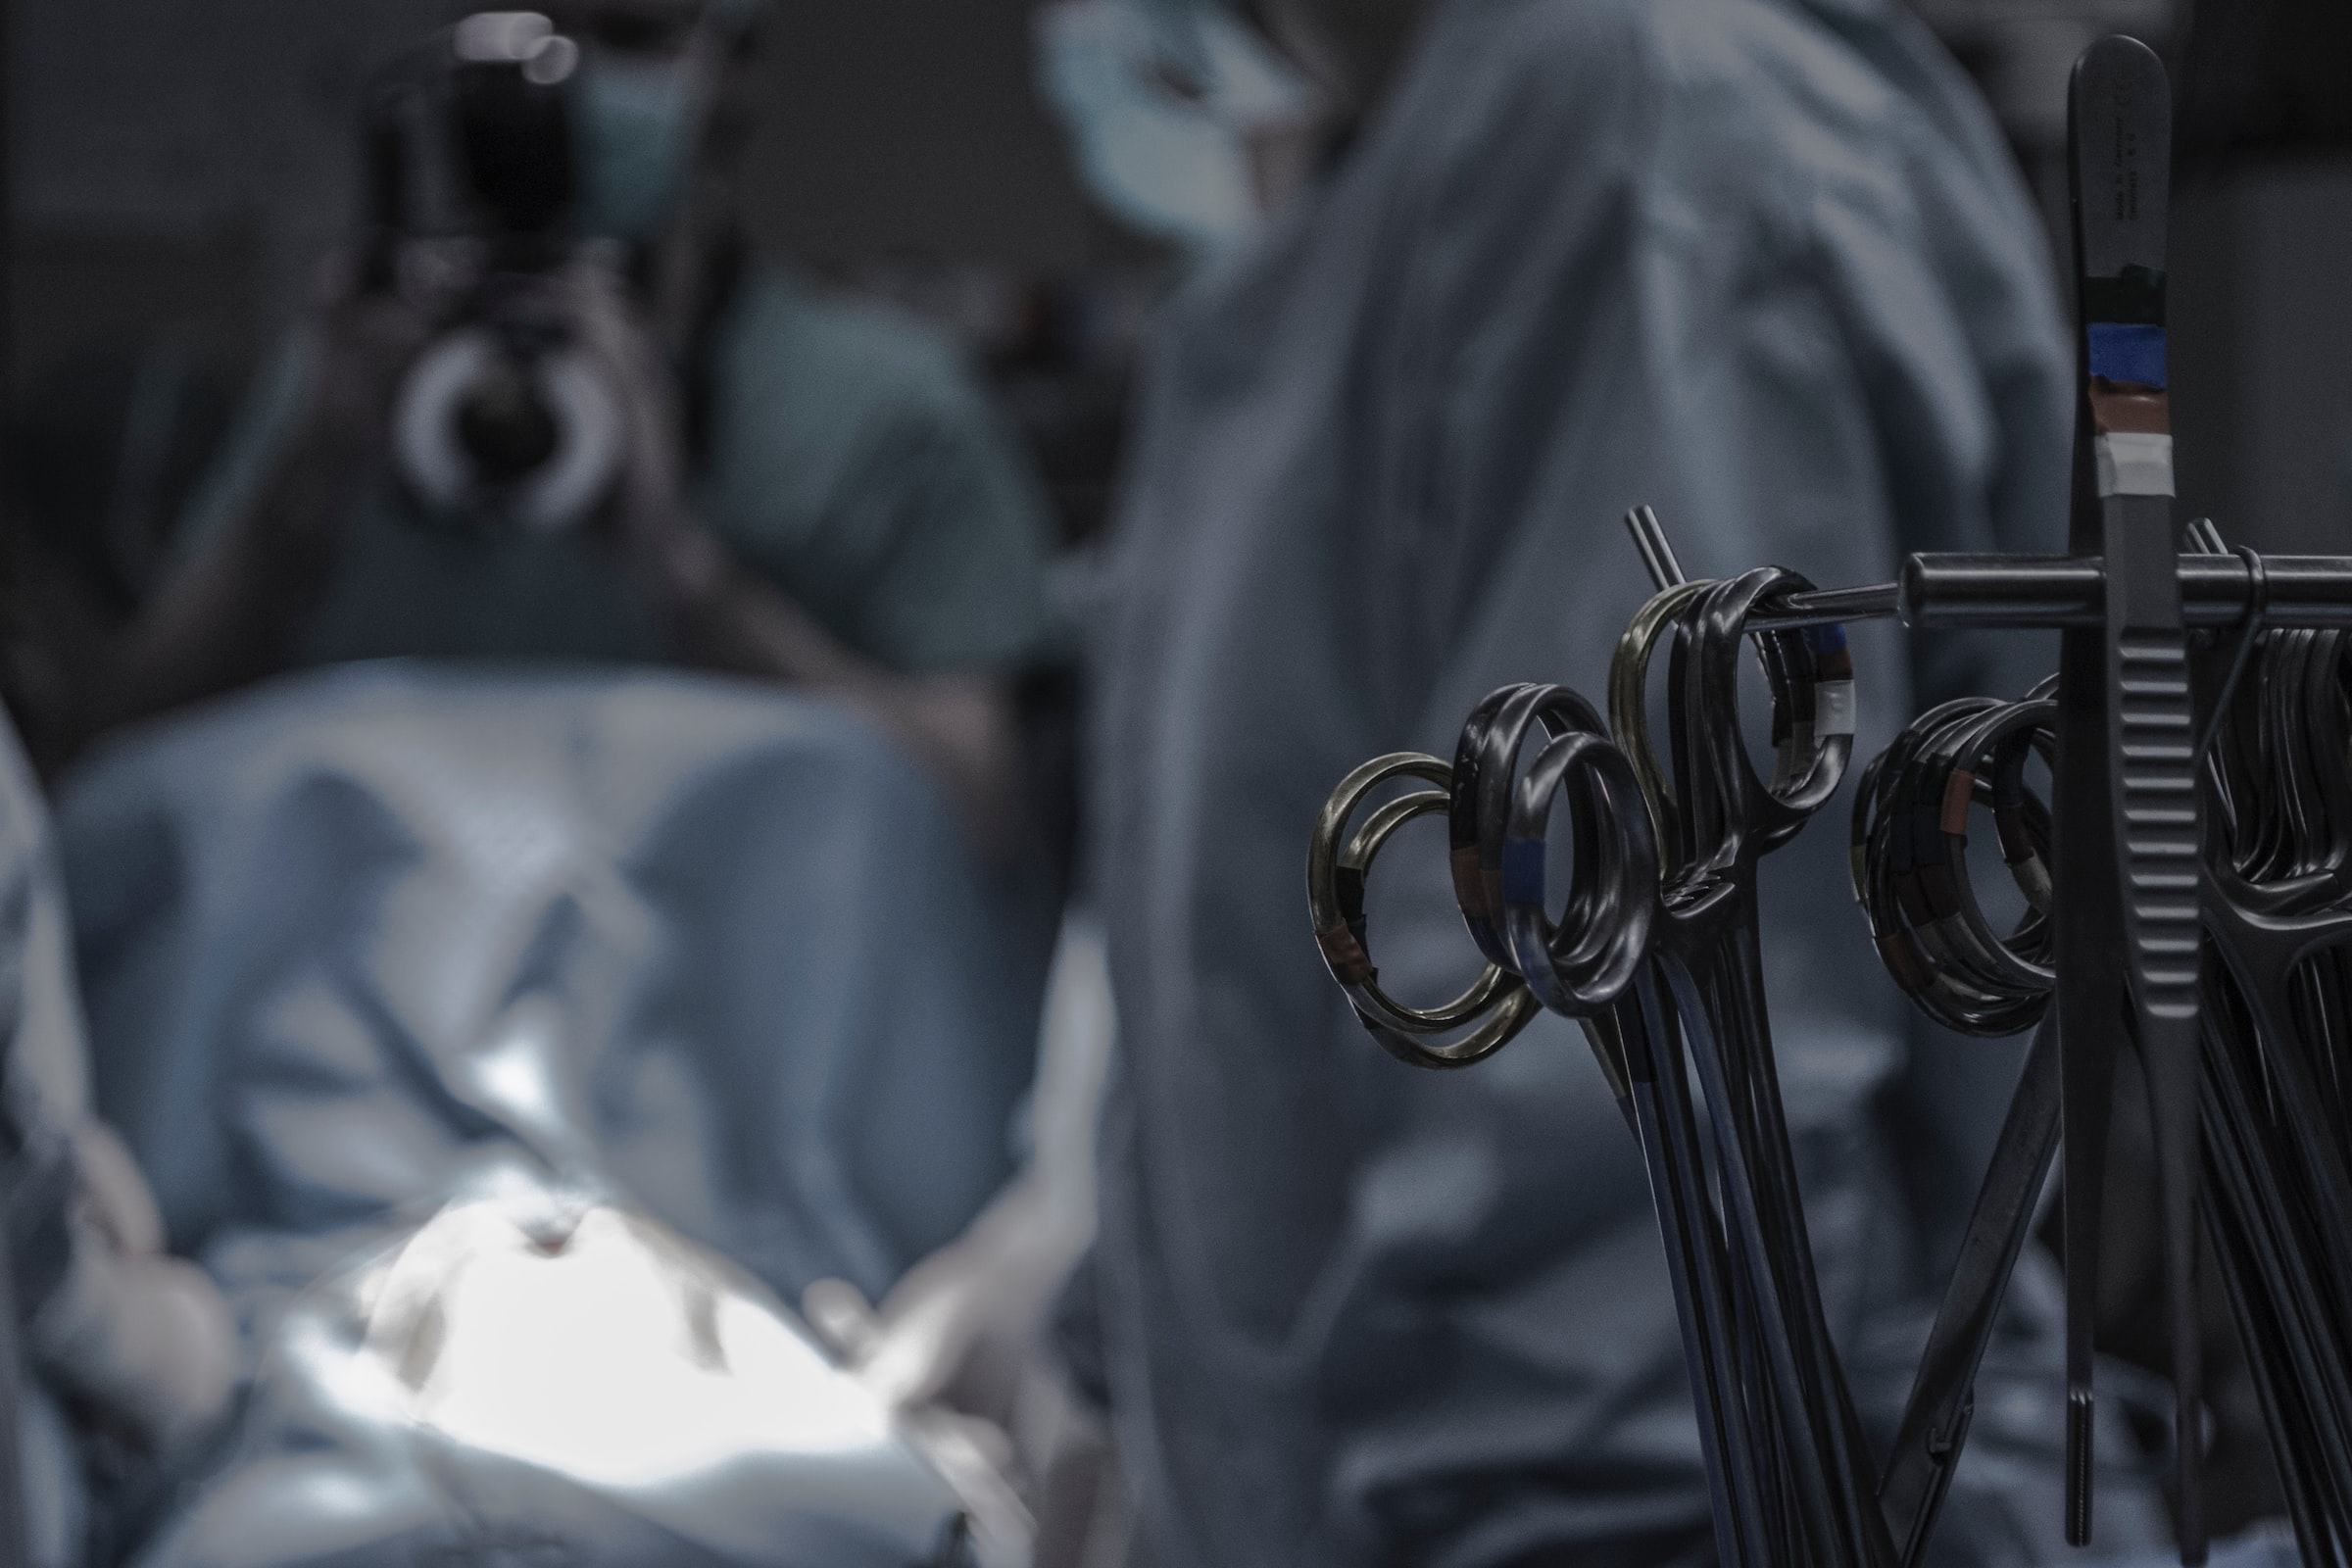 Surgery - Photo by Piron Guillaume on Unsplash